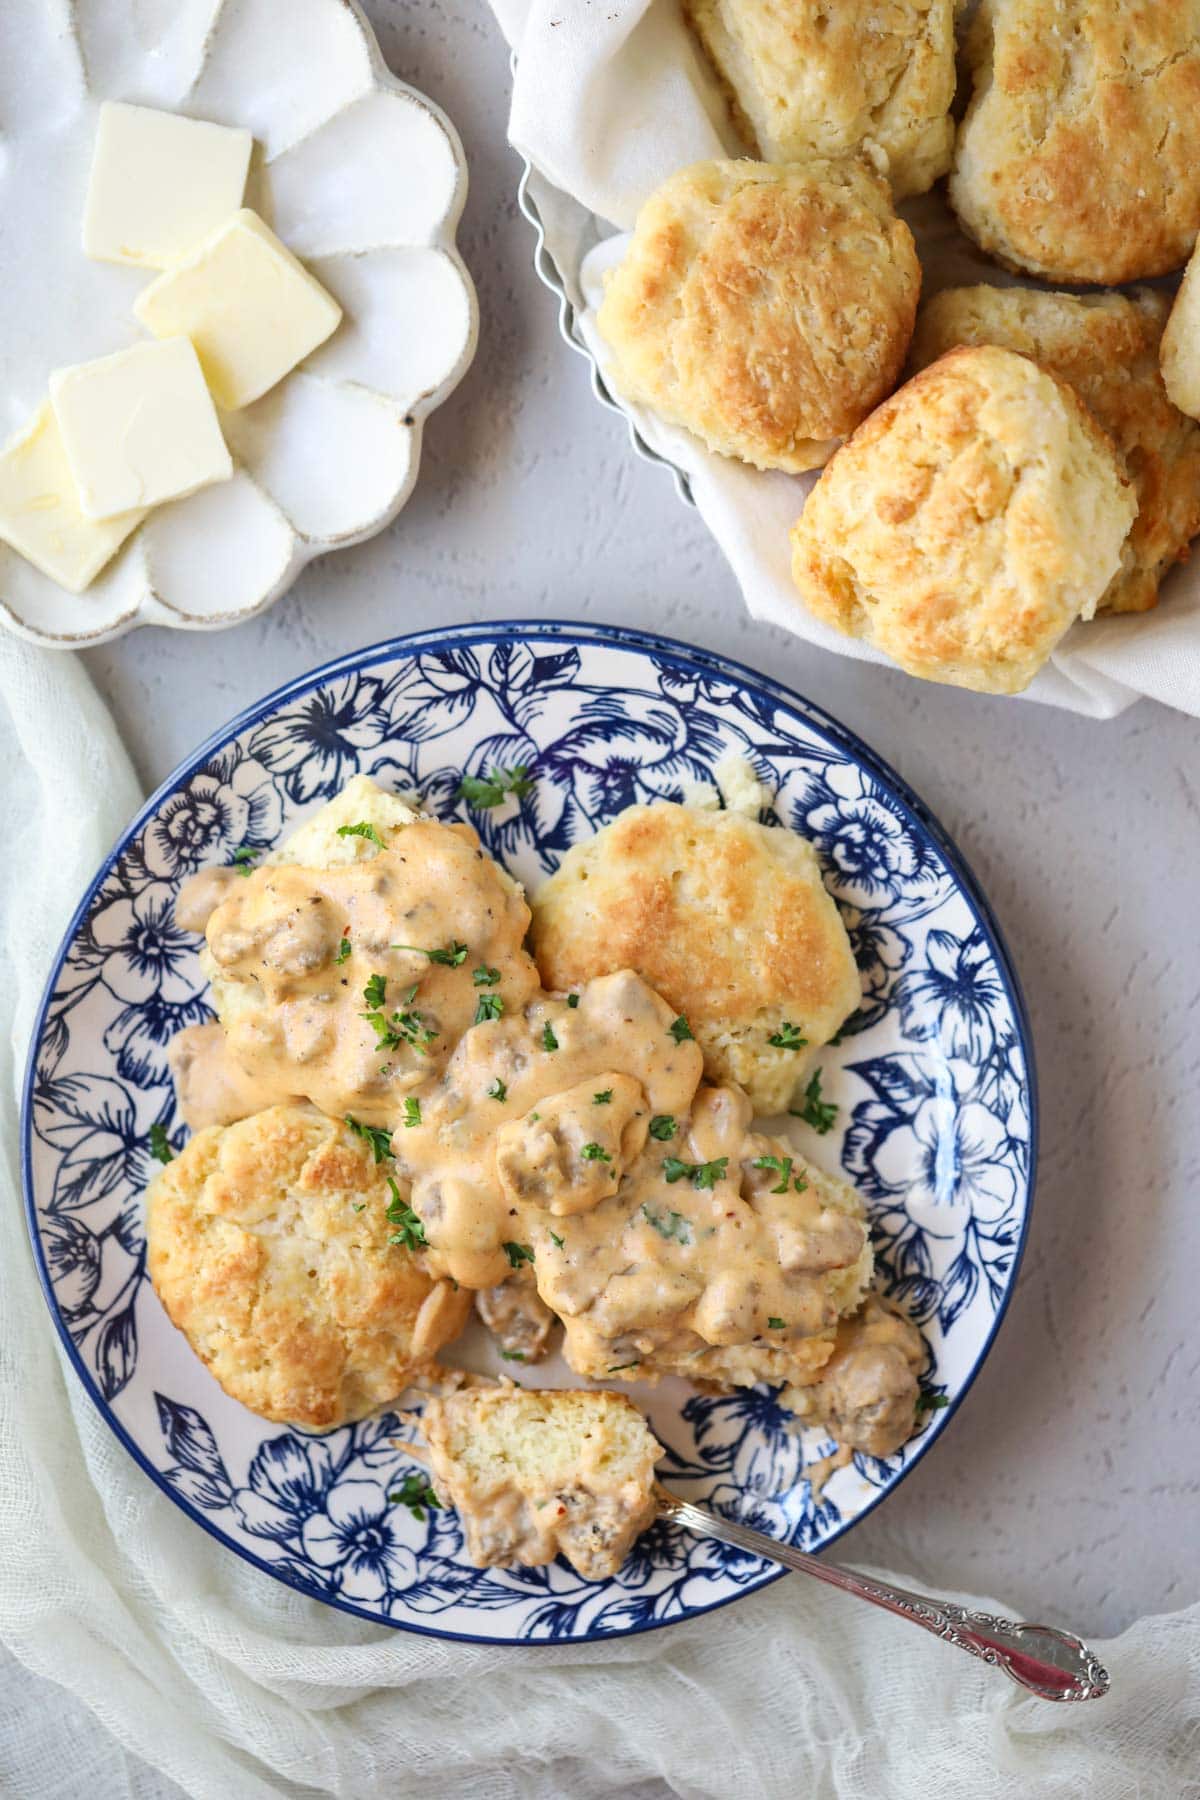 biscuits and gravy on a blue and white plate with a pan of biscuits in the top right corner.